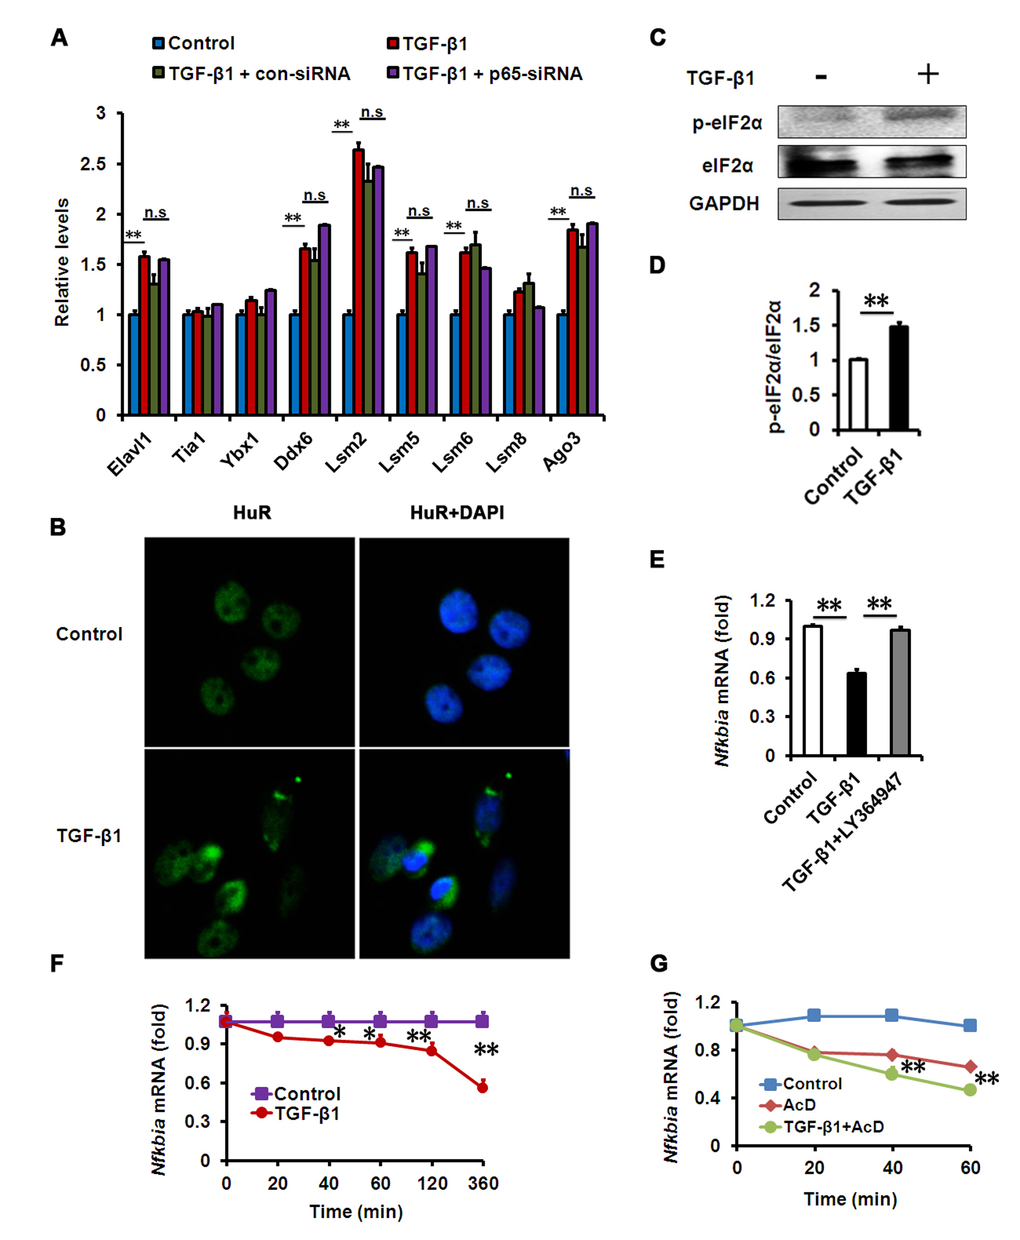 Effects of TGF-β1 on HCECs RNA SGs and IκBα mRNA decay. (A-B) mRNA levels of SG and PB components (A) or HuR immunostaining (B) in HCECs treated with TGF-β1 (10 ng/ml) for 24h alone, or in combination with indicated siRNA. Nuclear staining by DAPI revealed cells in sections. Images show representative HuR-containing aggregates. (C-D) Phosphorylation of eIF2α was detected by western blot after TGF-β1 (10 ng/ml) treatment for 24h. (E) mRNA levels of IκBα in HCECs treated with TGF-β1 (10 ng/ml) alone, or in combination with LY364947 (2μM) for 24h. (F-G) IκBα mRNA levels in HCECs treated with TGF-β1 (10 ng/ml) (F) or actinomycin D (AcD) alone or AcD together with TGF-β1 (G) for the indicated durations. **P≤0.01,*P ≤0.05.